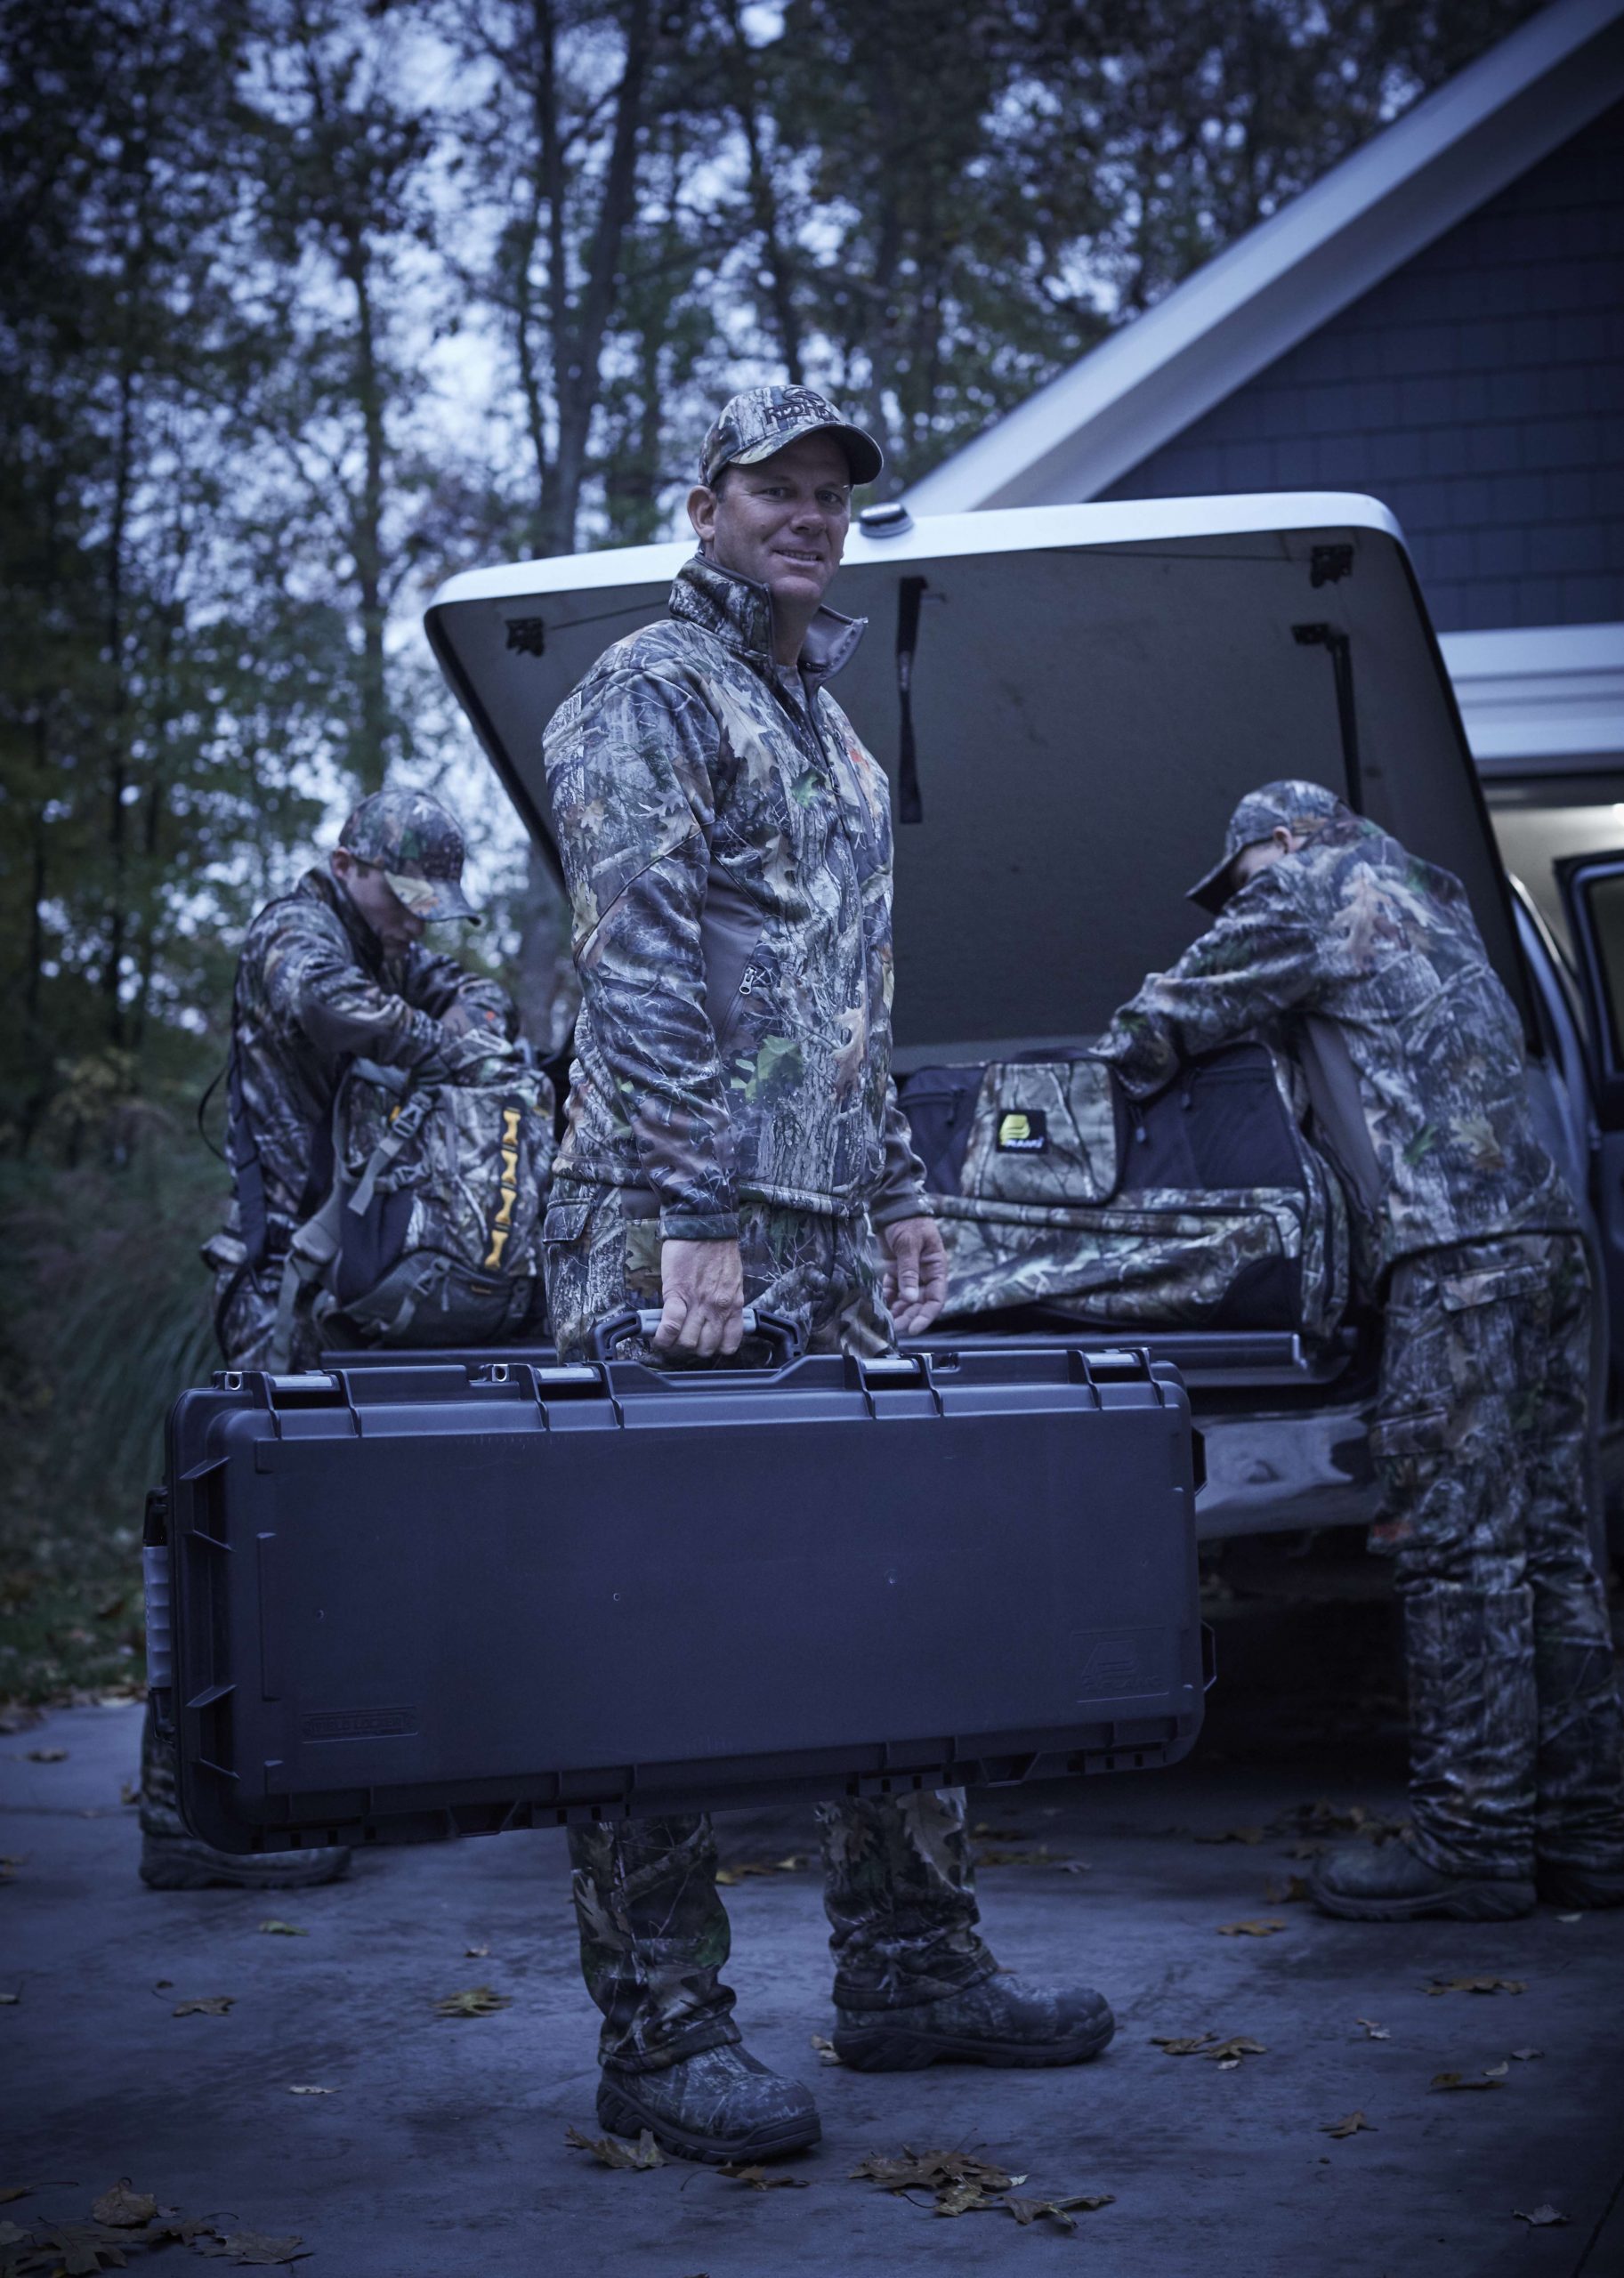 With three hunters, it doesn't take long to fill the back of the truck with gear â bow cases, backpacks, safety equipment and more.